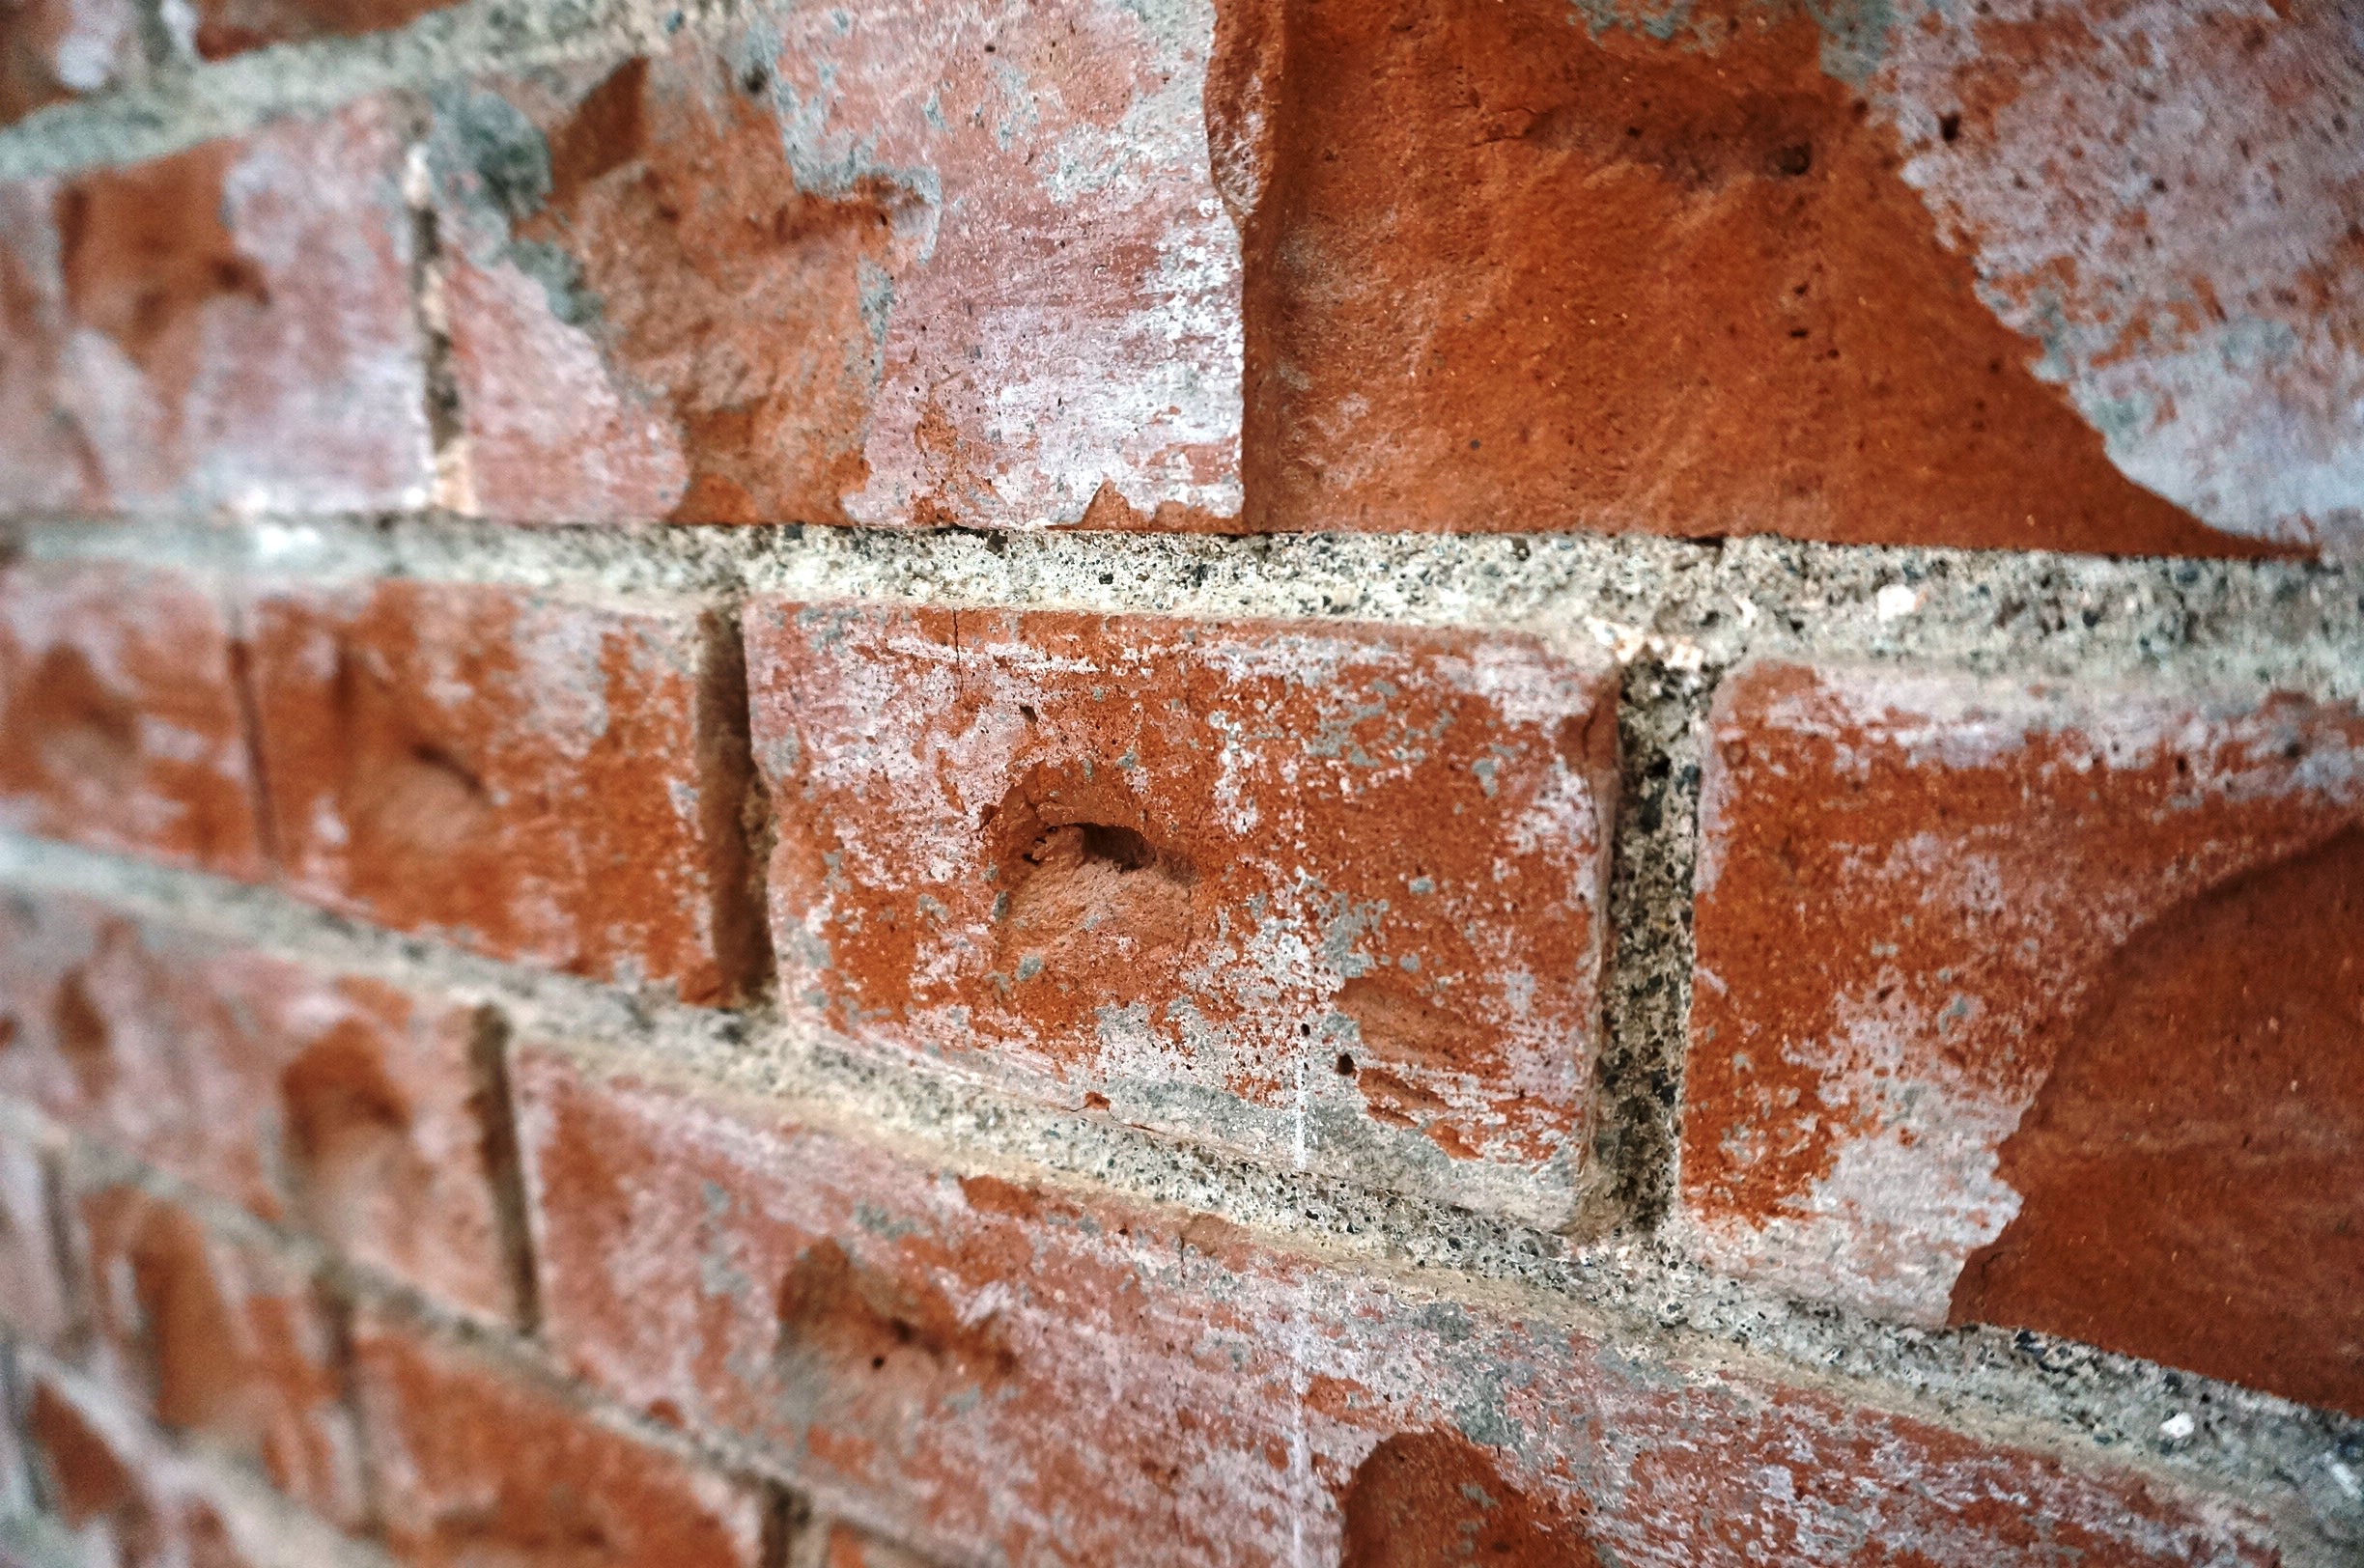 About the Irregularities of the Brick